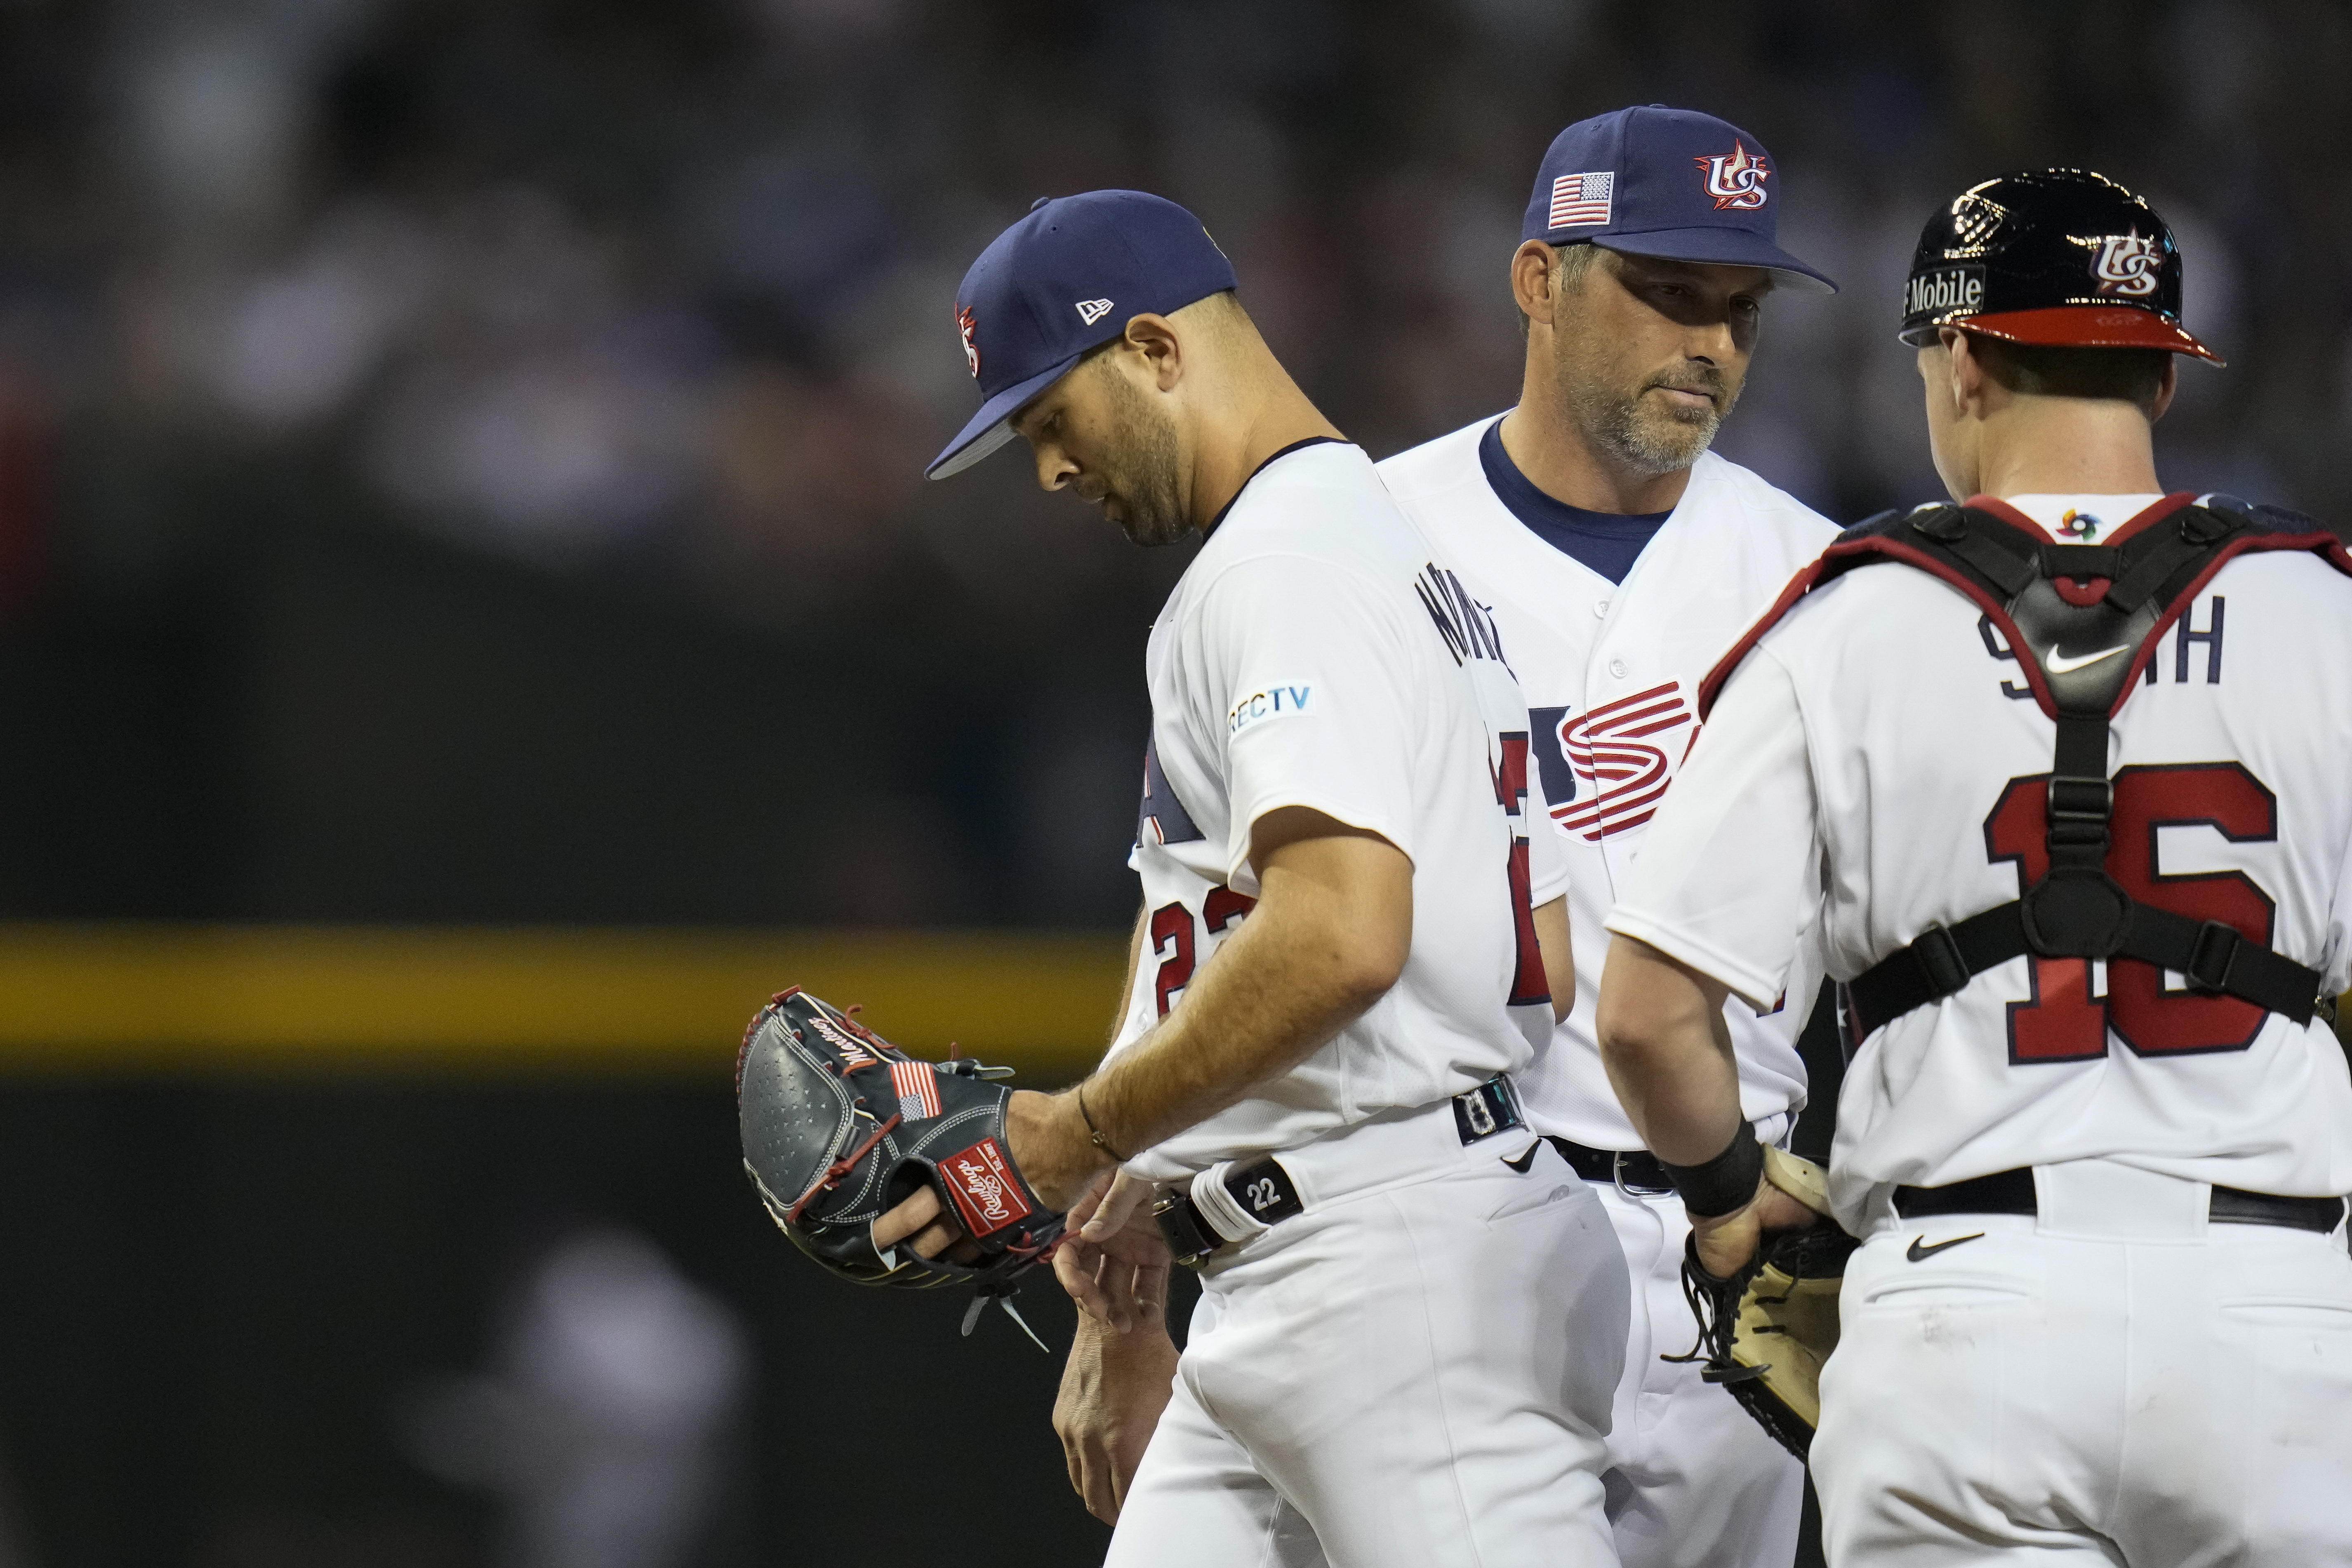 Competition or exhibition? WBC's pitching rules loom large